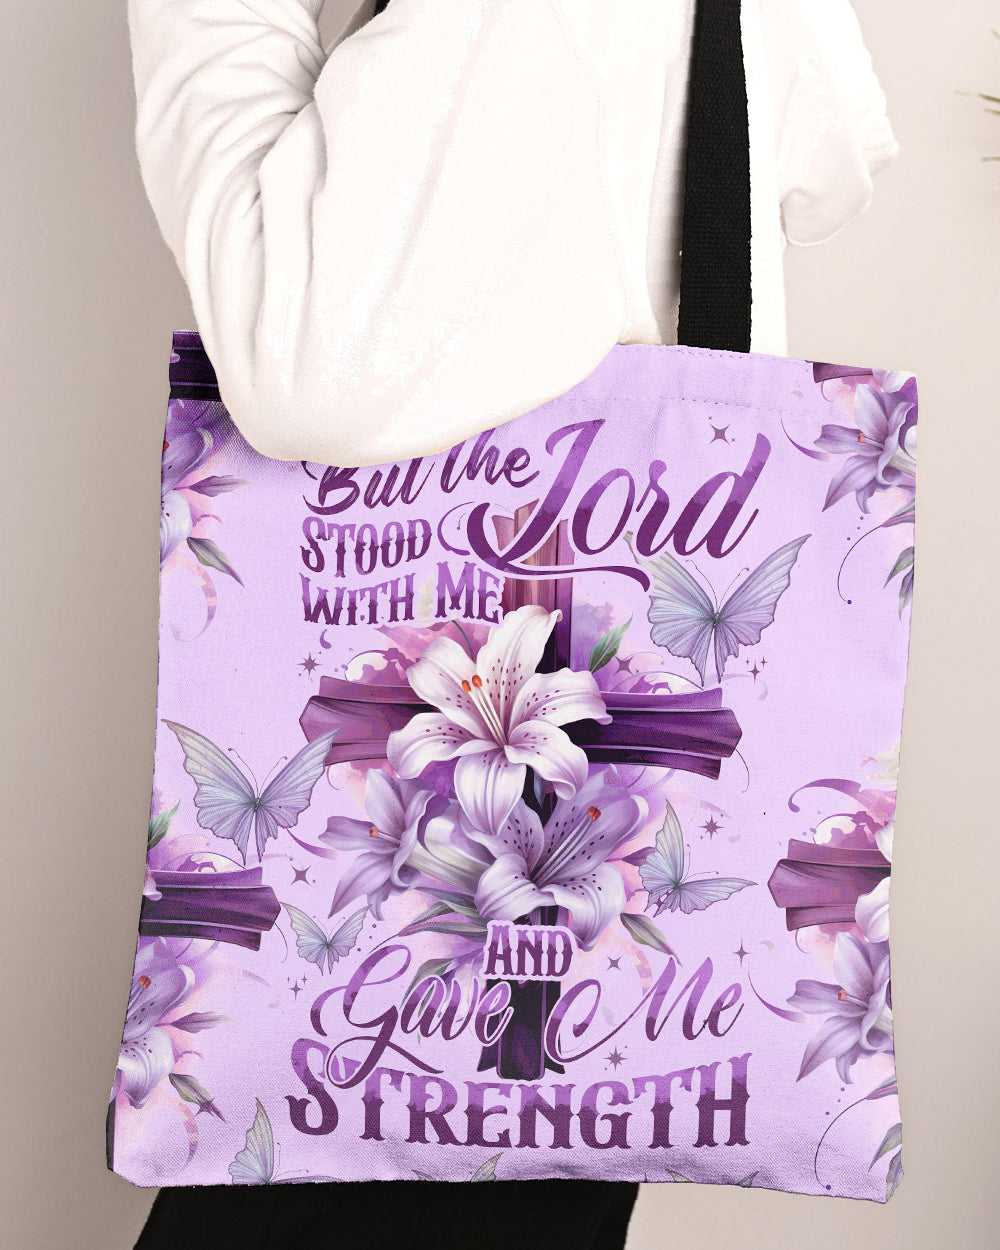 Lord Stood With Me Tote Bag - Tytd1008234